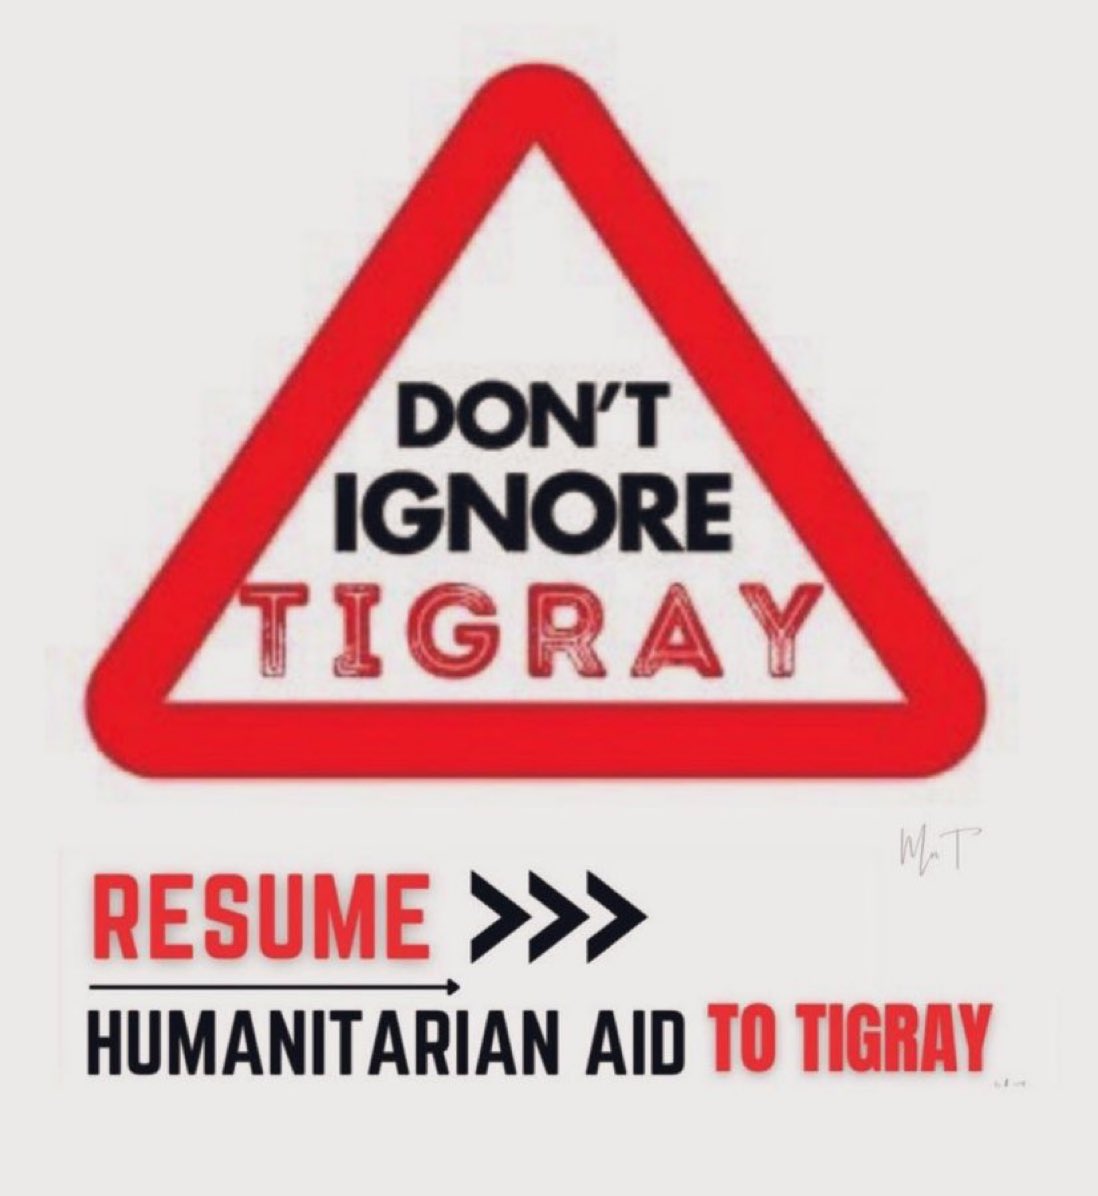 The systemic starvation of Tigrayans is one aspect of the long list of war crimes in 🇪🇹 Tigray. 

Millions continue suffering.
#ReturnICHREE #ResumeAid4Tigray @UNICEF_uk @USAID @WFPChief @RepKarenBass @UN_HRC @UNOSAPG @USAmbUN @MSF @KenyaMissionUN @EUCouncil @UNHumanRights @ICRC…